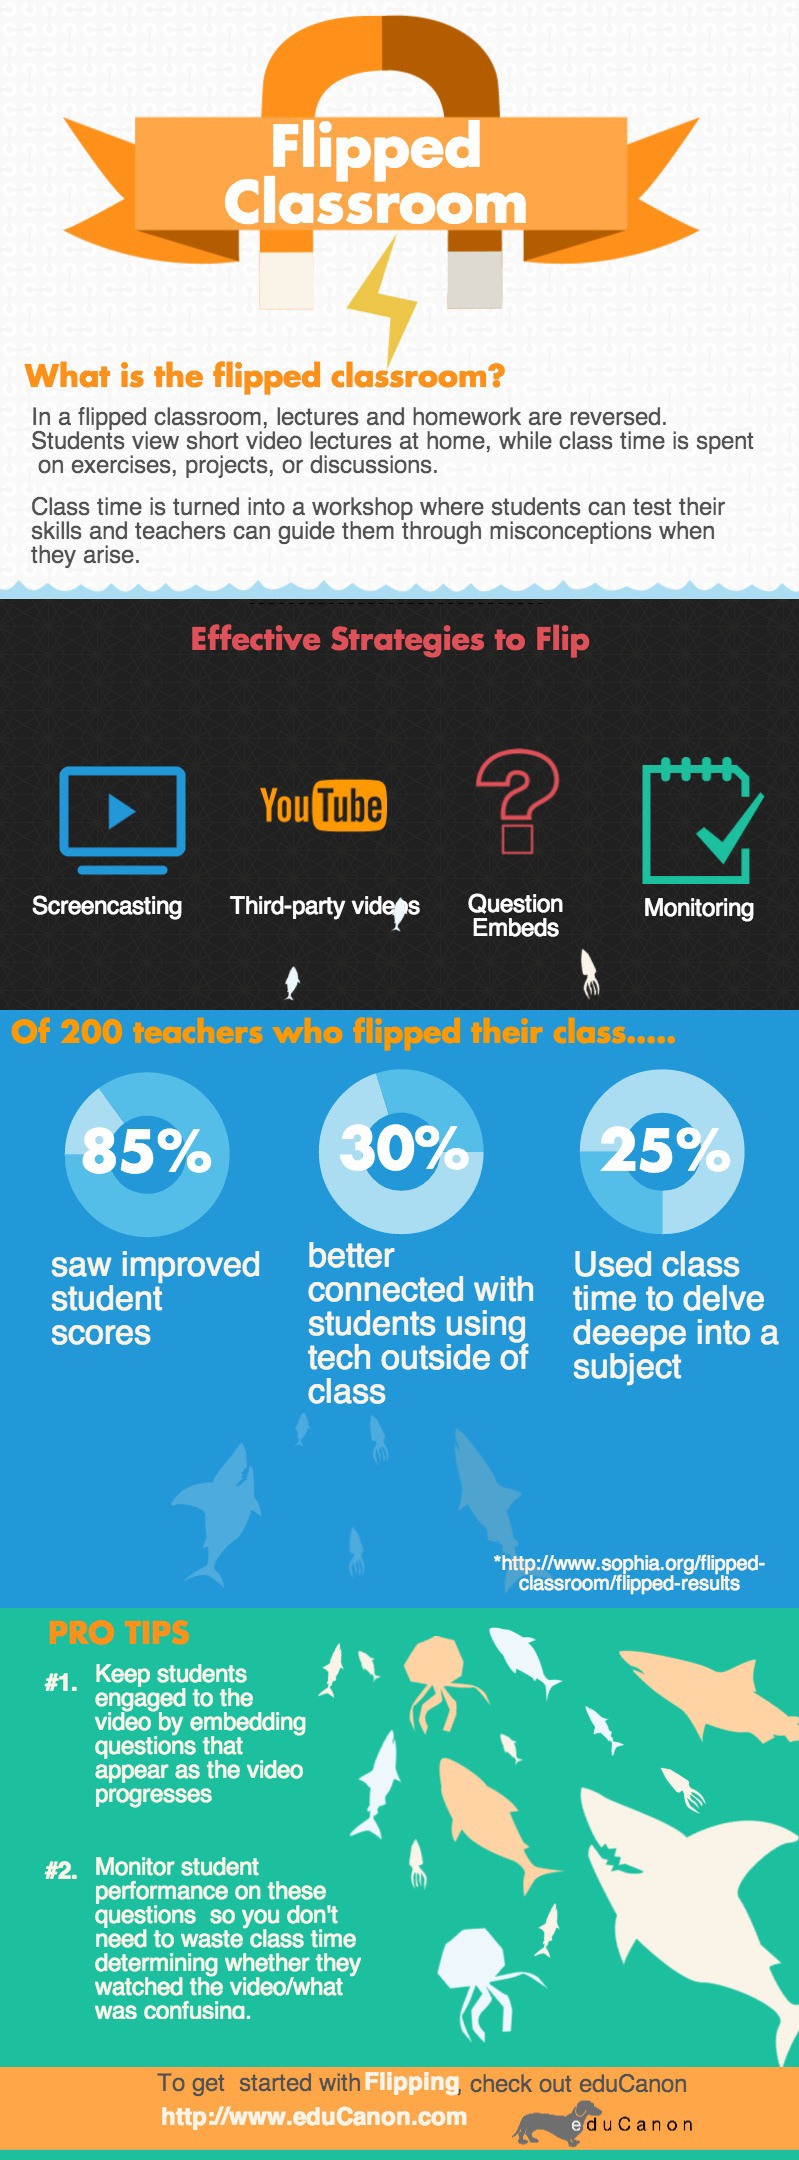 Effective Strategies to Flip the Classroom Infographic